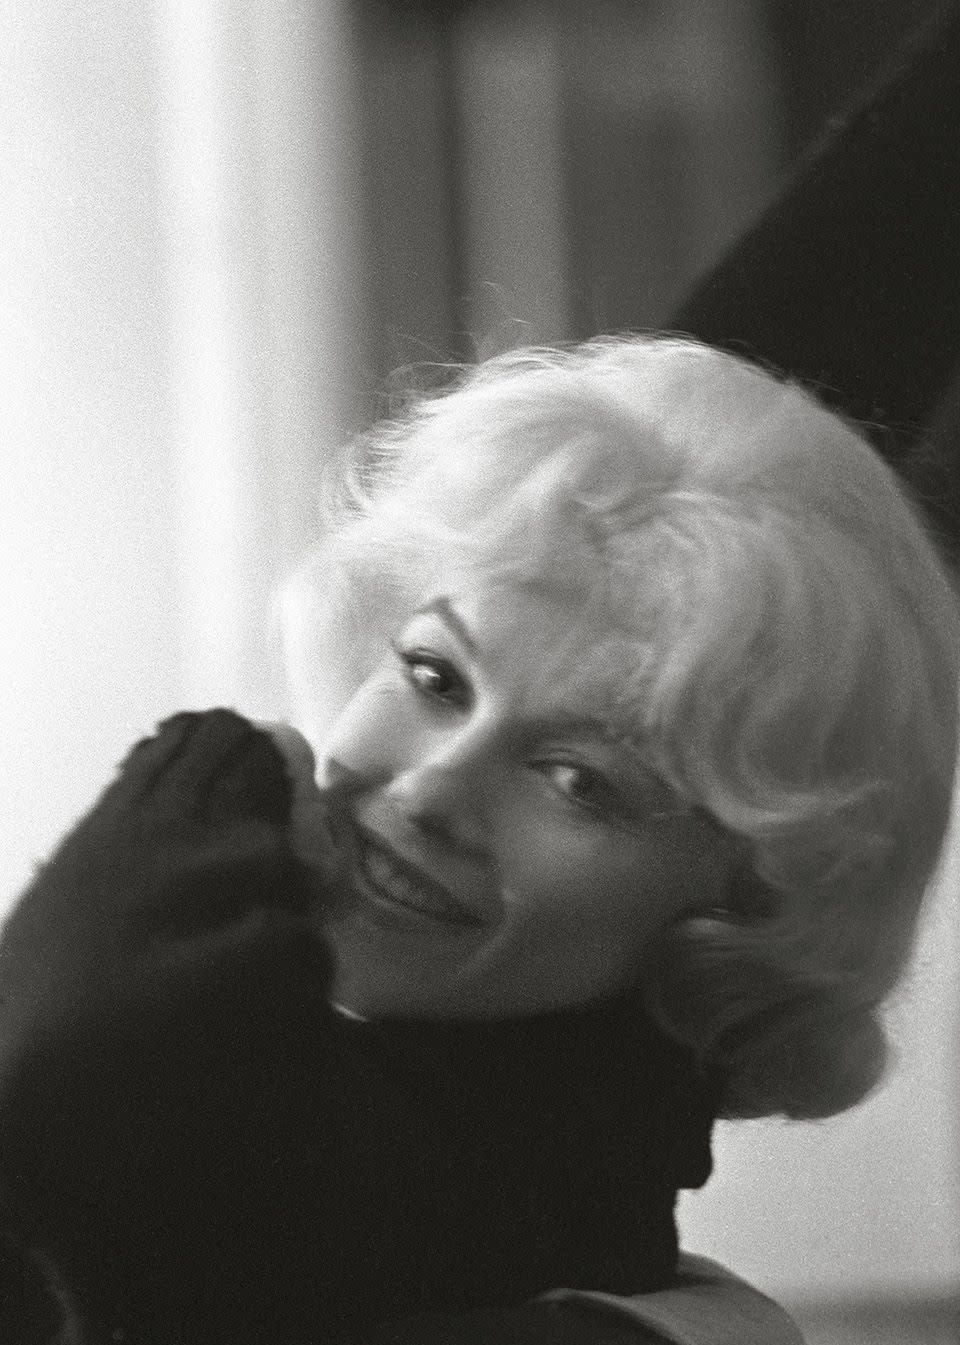 <p>"Looking over her left shoulder, she flashed a coy smile that told me all I needed to know about Marilyn Monroe: she knew who she was, she knew who I was, she knew what to do."</p>